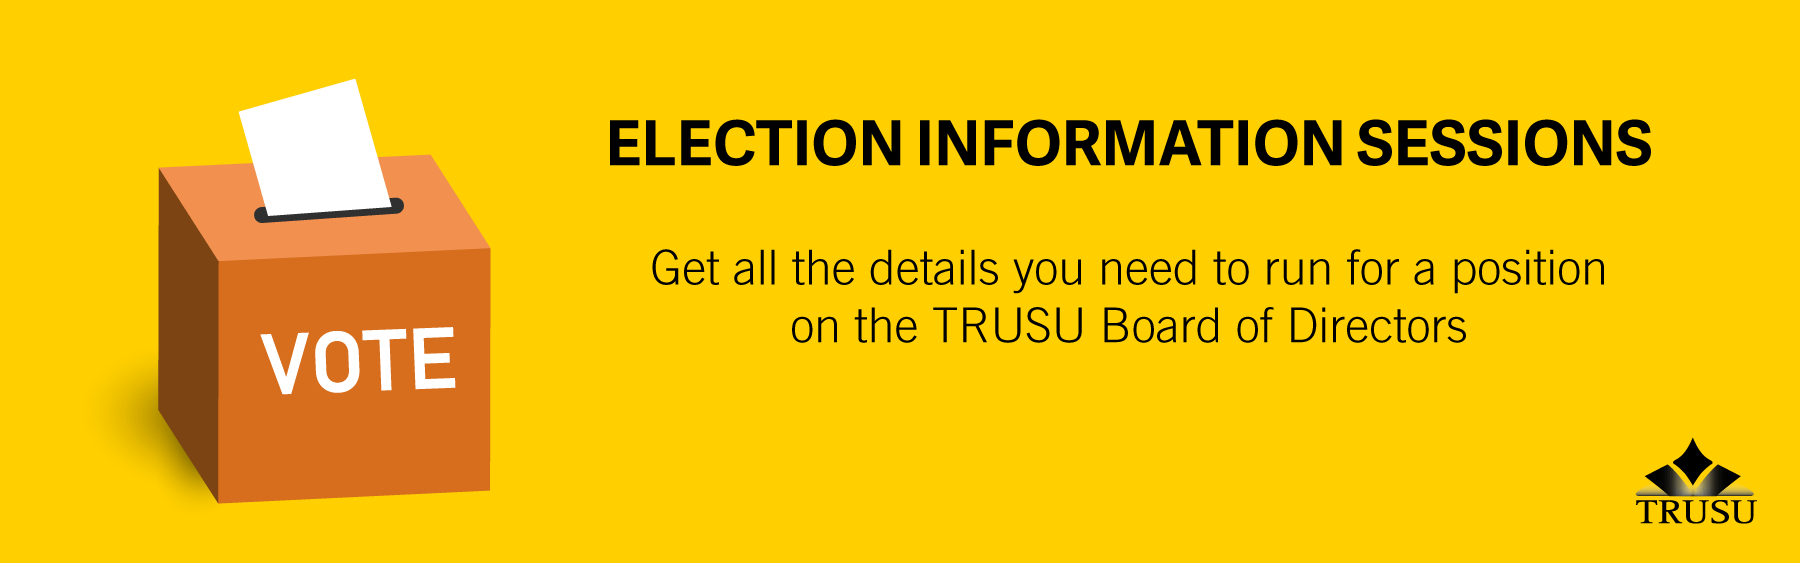 Election Information Sessions